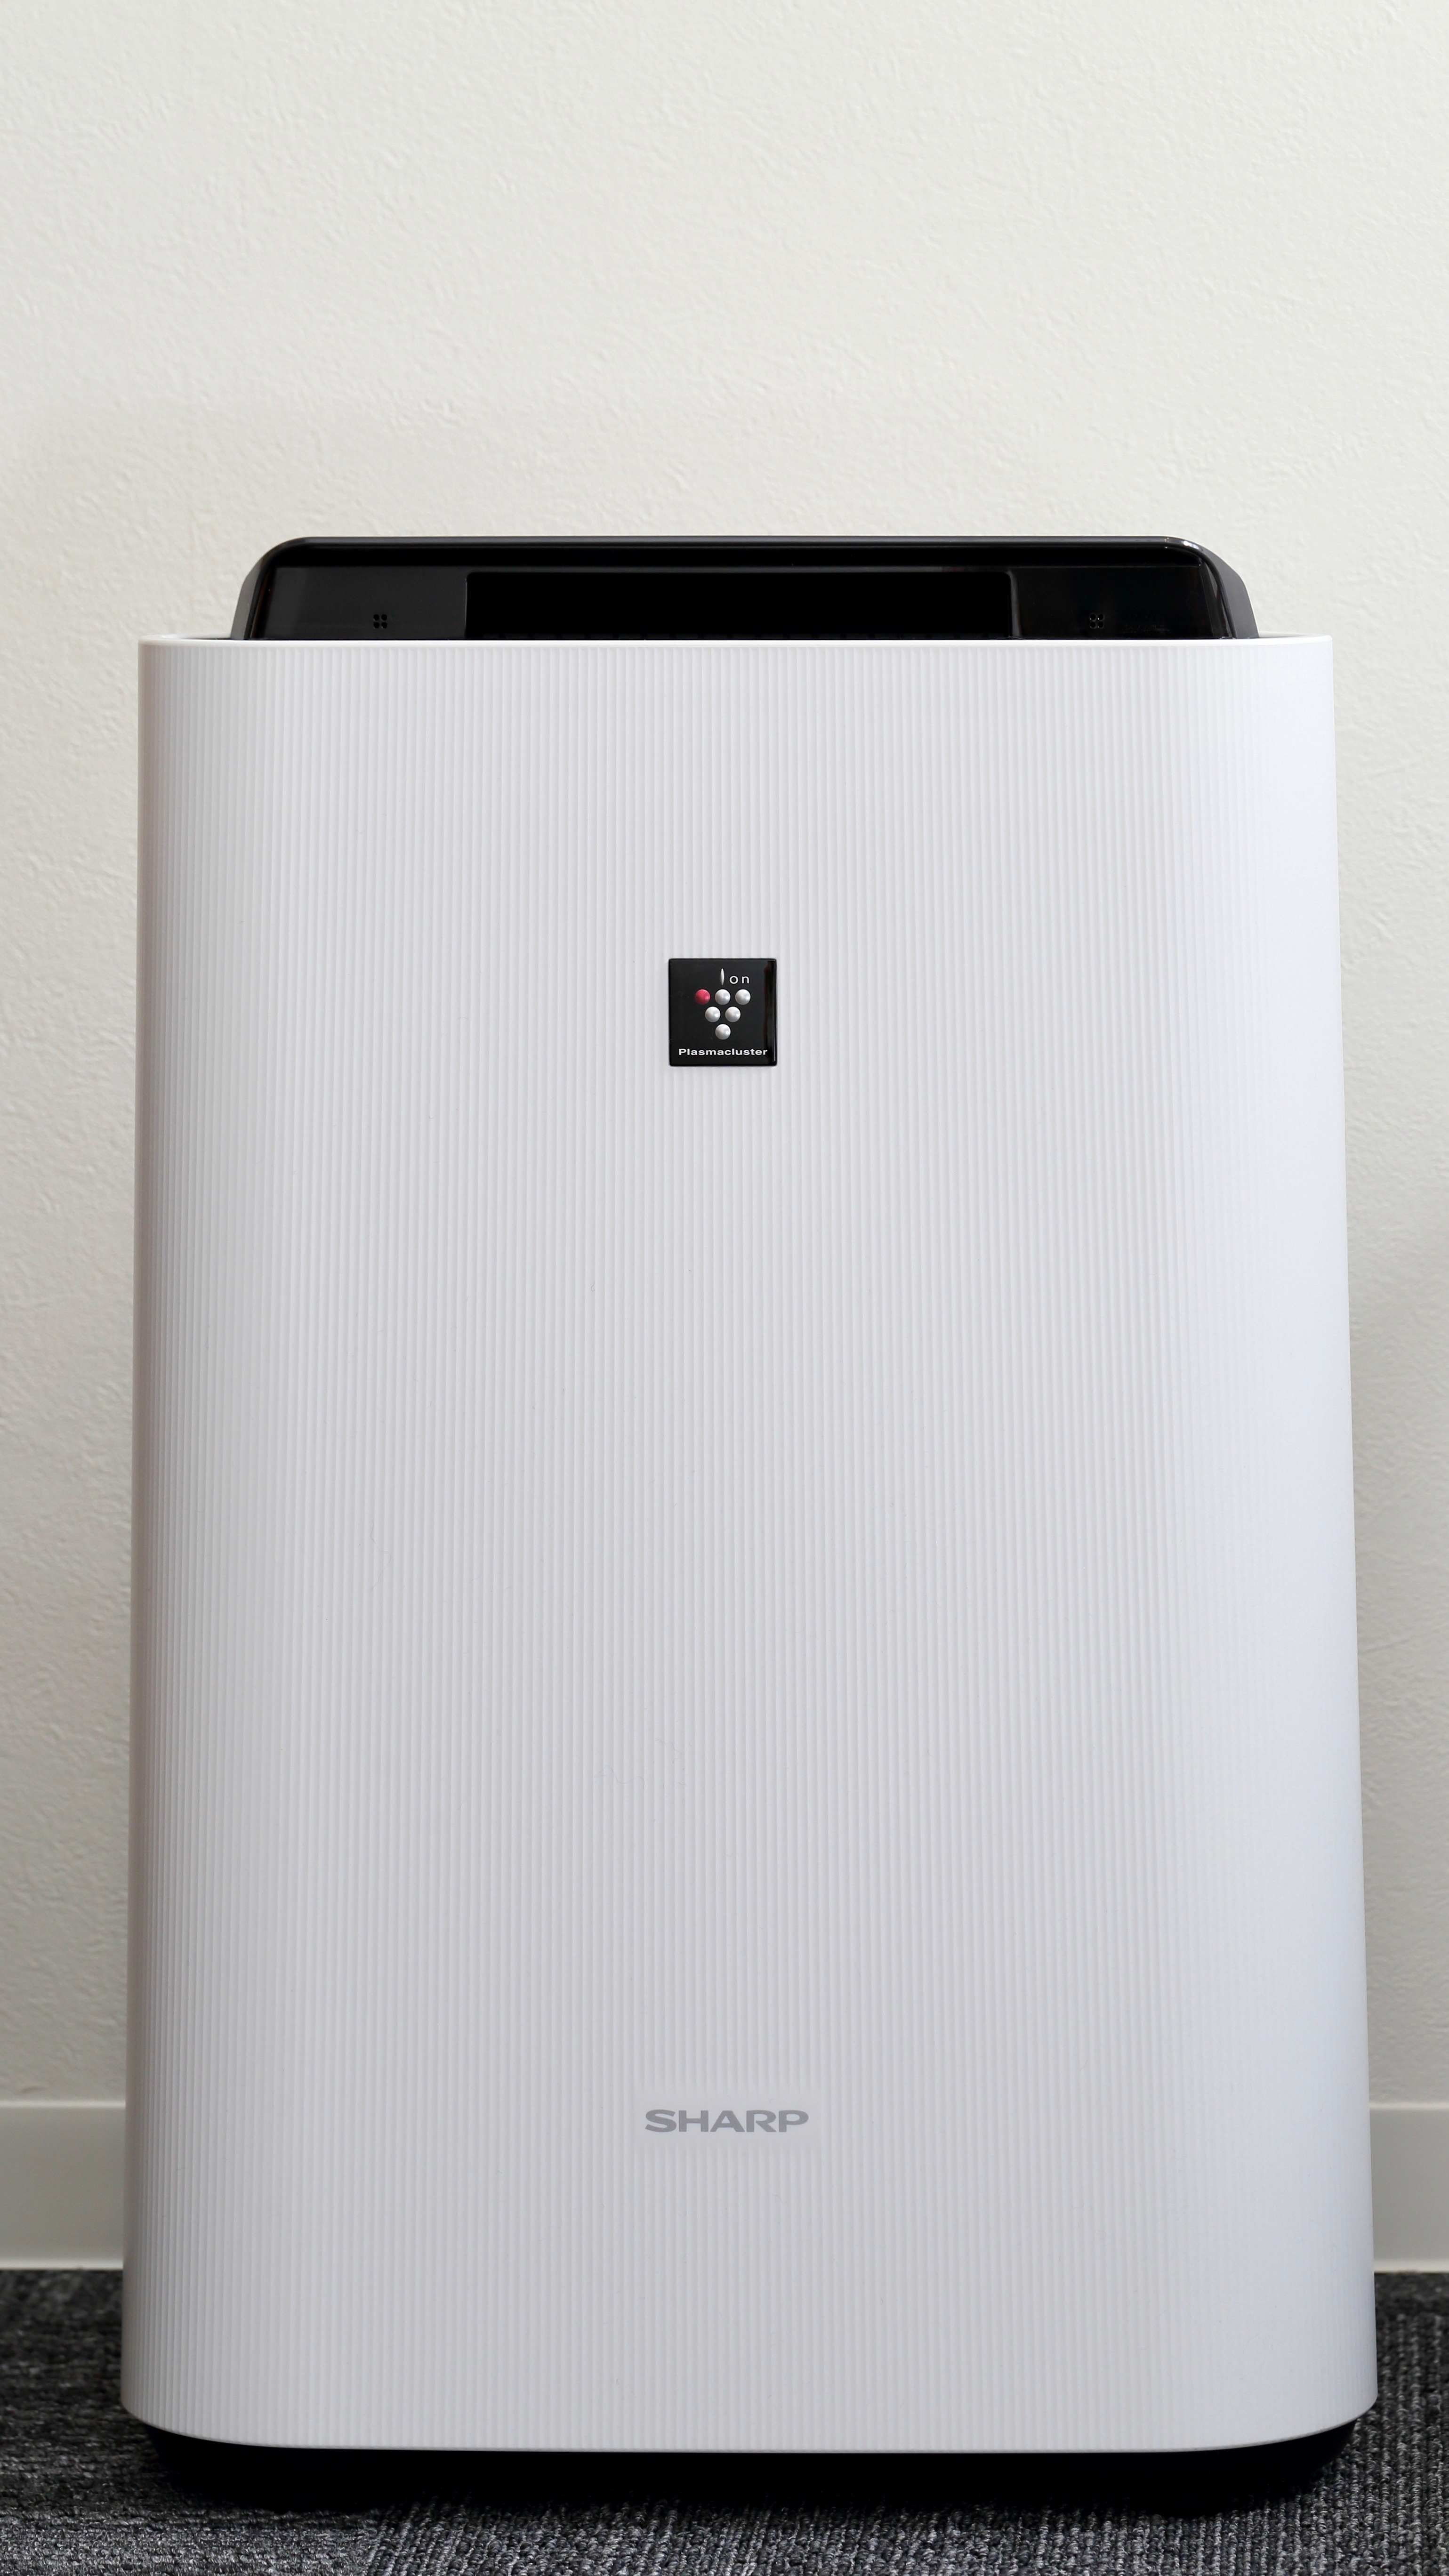 Equipped with SHARP plasma cluster humidifying air purifier